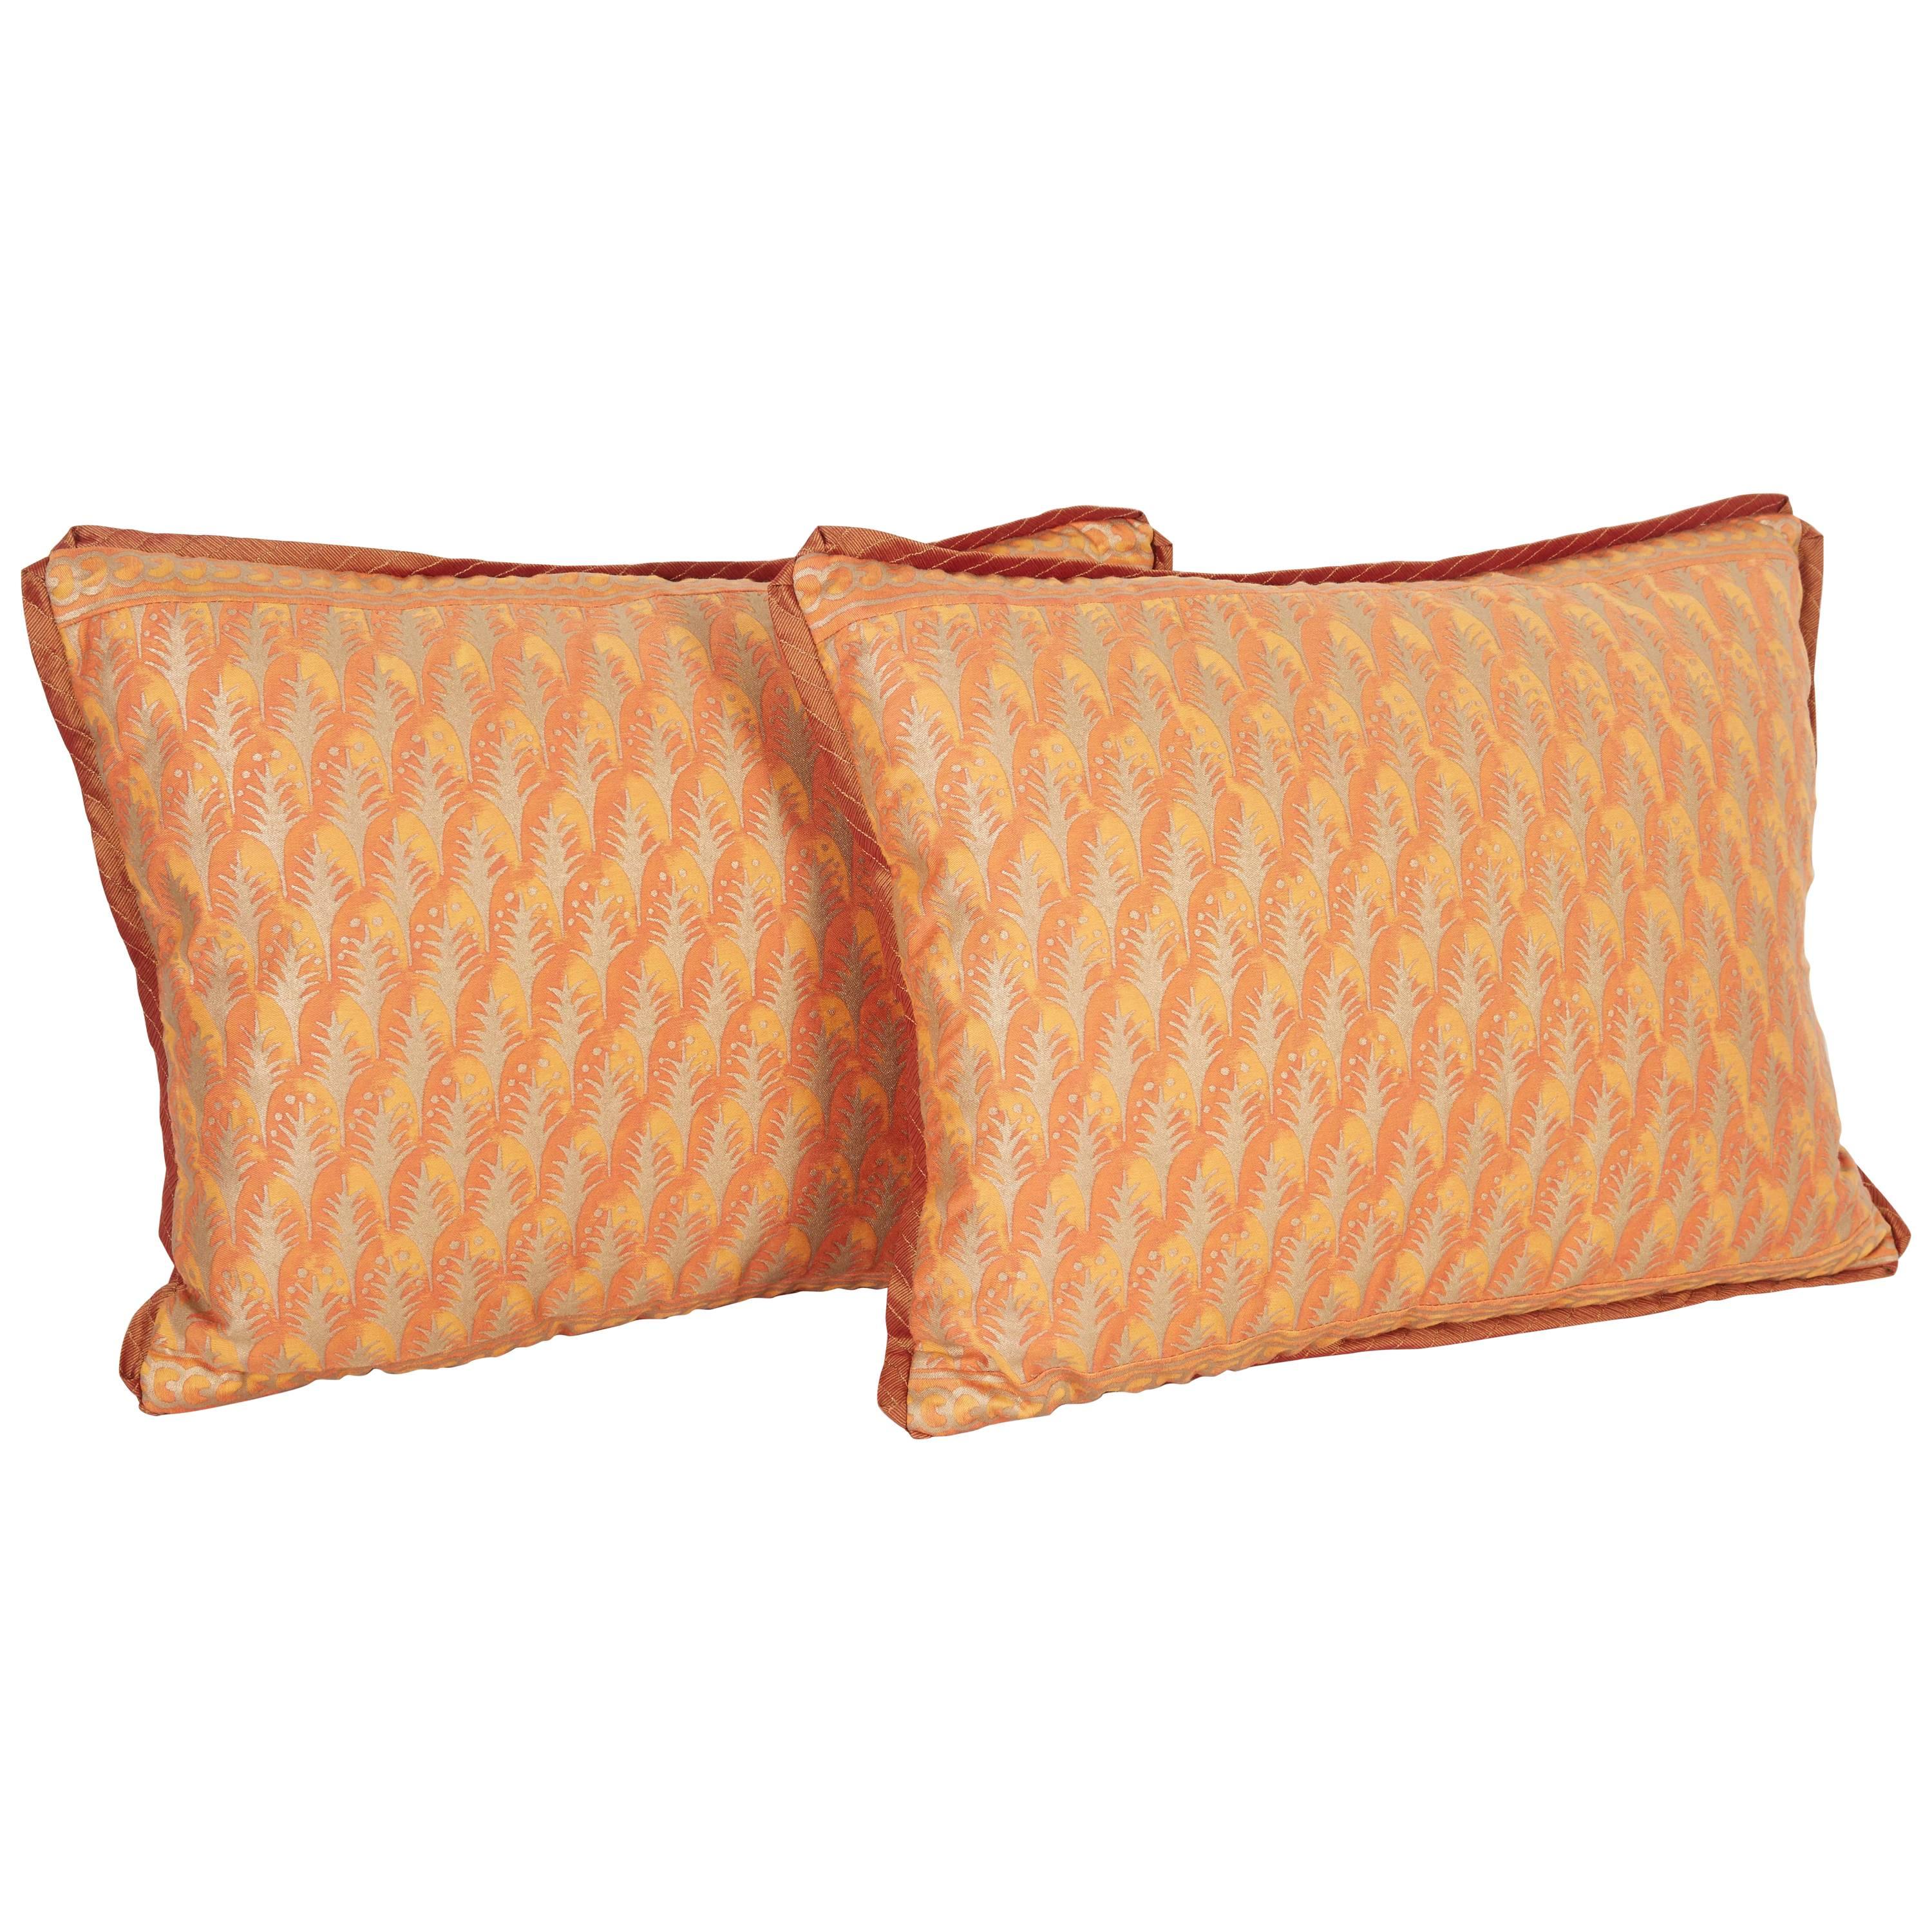 A Pair of Fortuny Fabric Lumbar Cushions in the Puimette Pattern